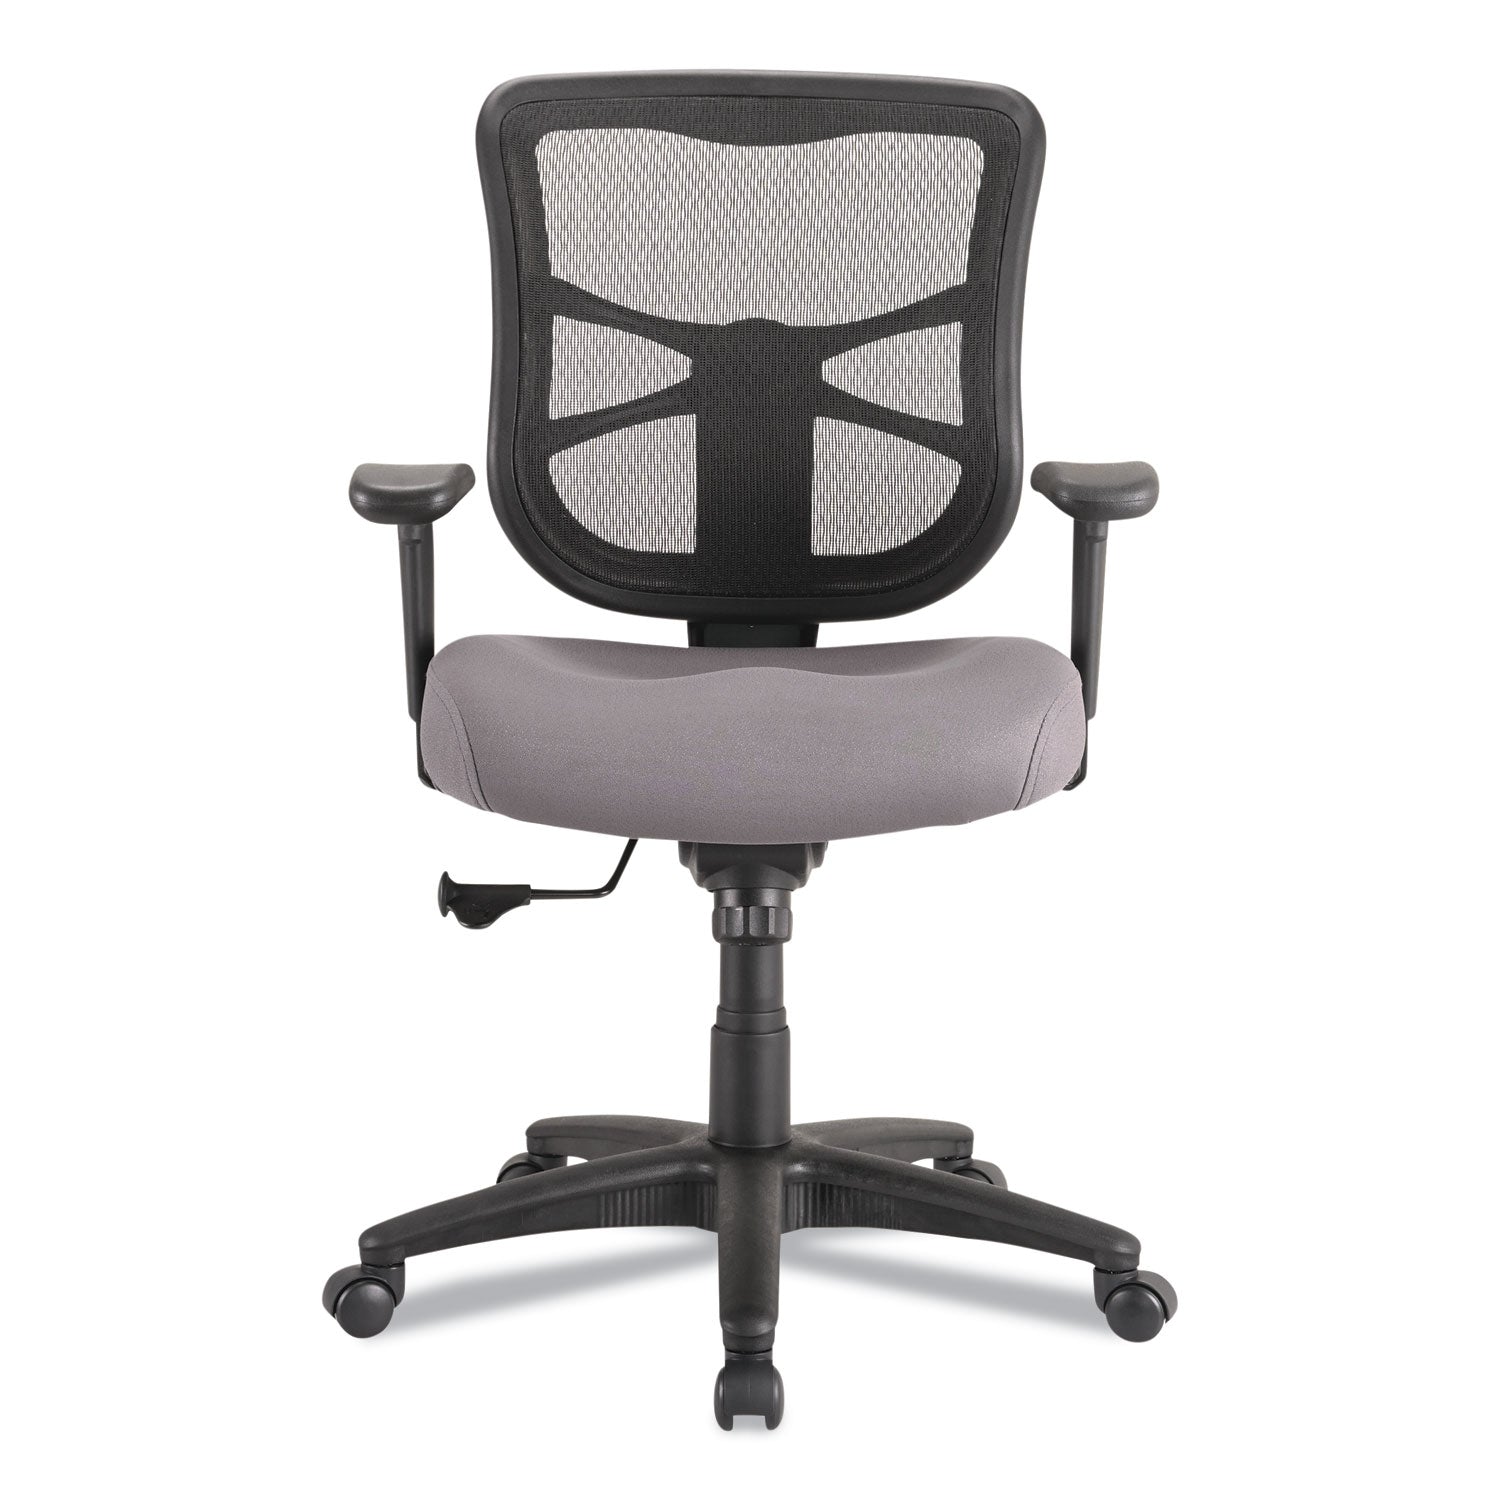 alera-elusion-series-mesh-mid-back-swivel-tilt-chair-supports-up-to-275-lb-179-to-218-seat-height-gray-seat_aleel42bme40b - 3